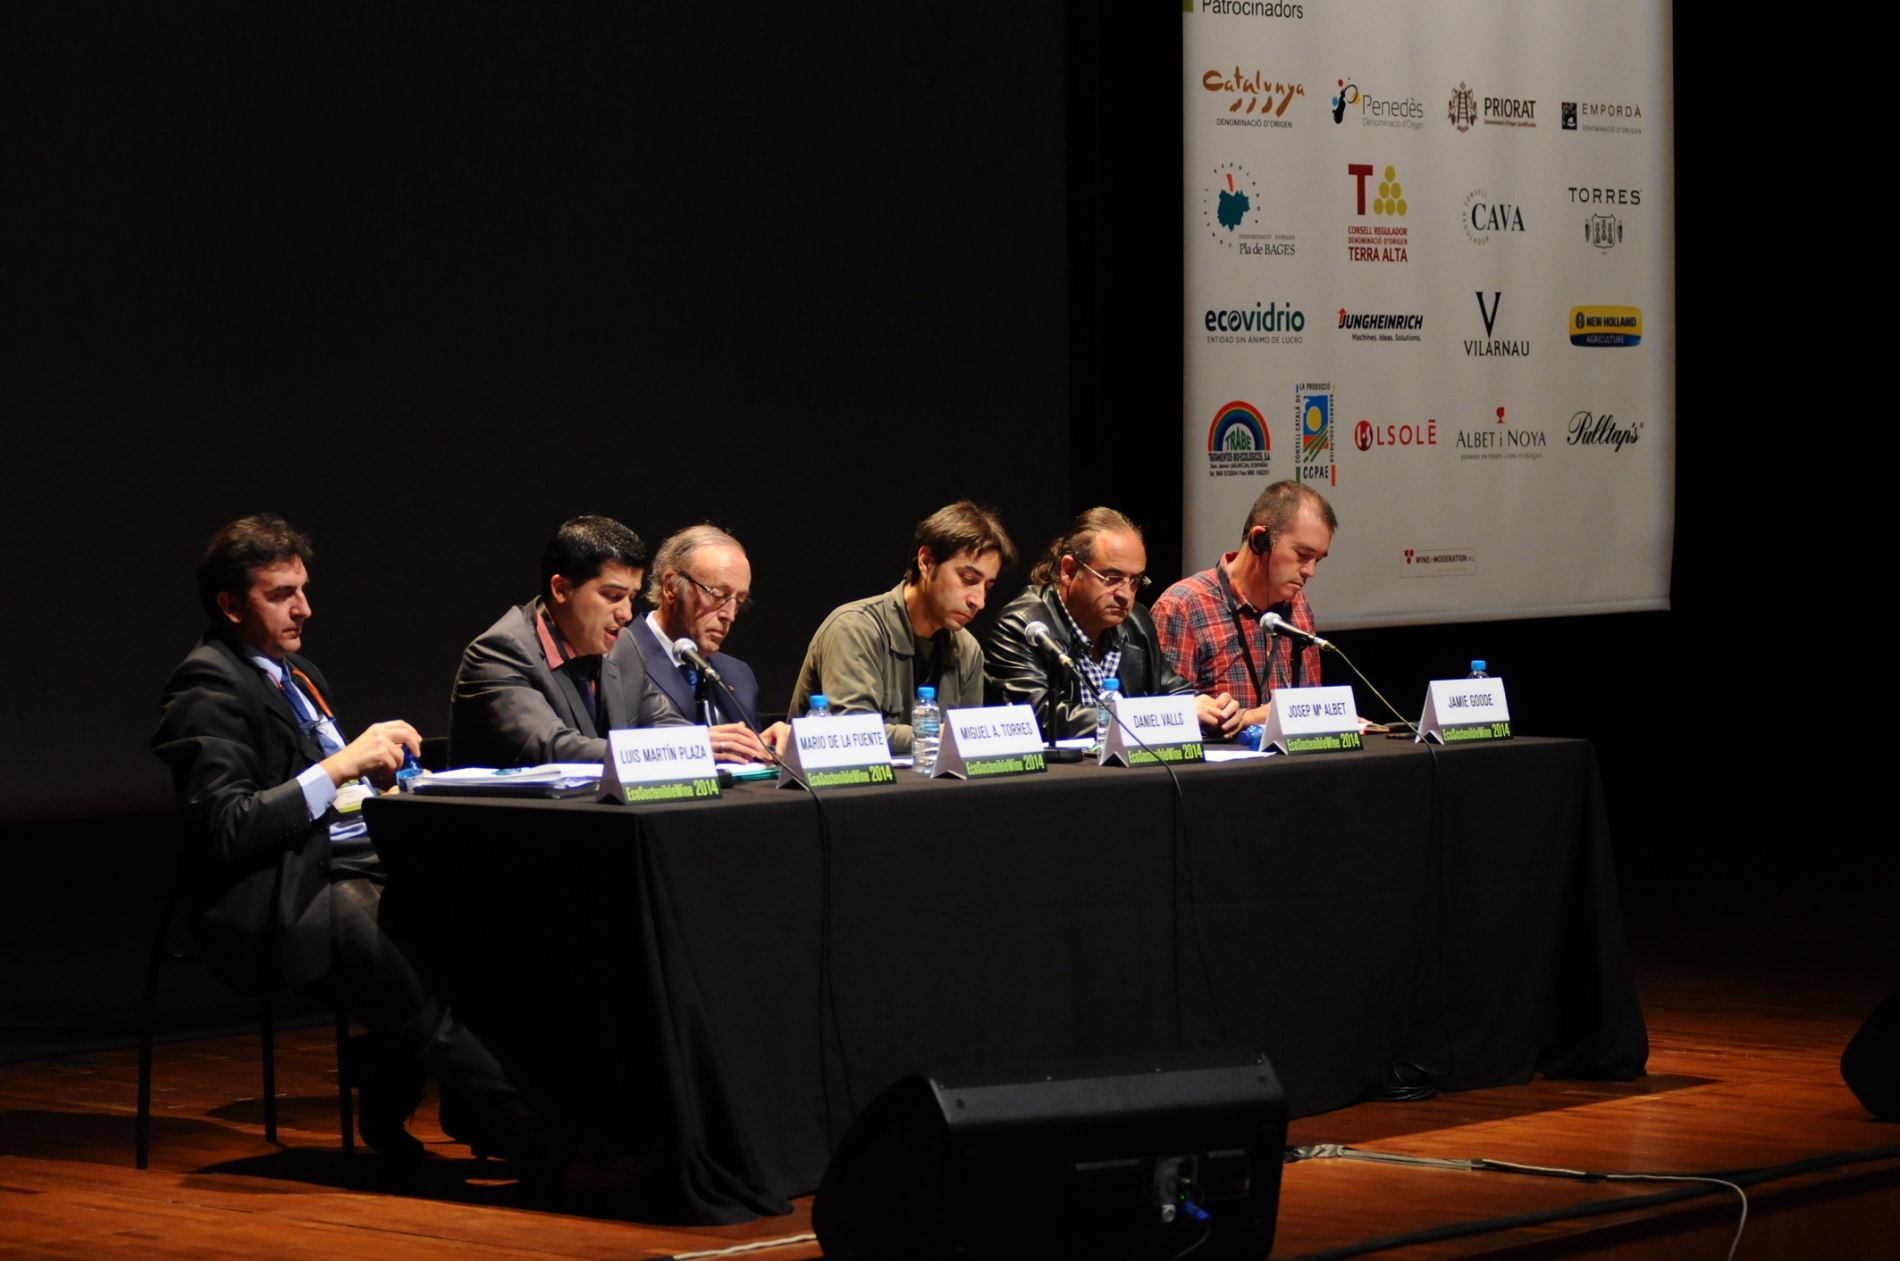 The OIV took part in the 2014 forum on vineyard ecology and sustainabi